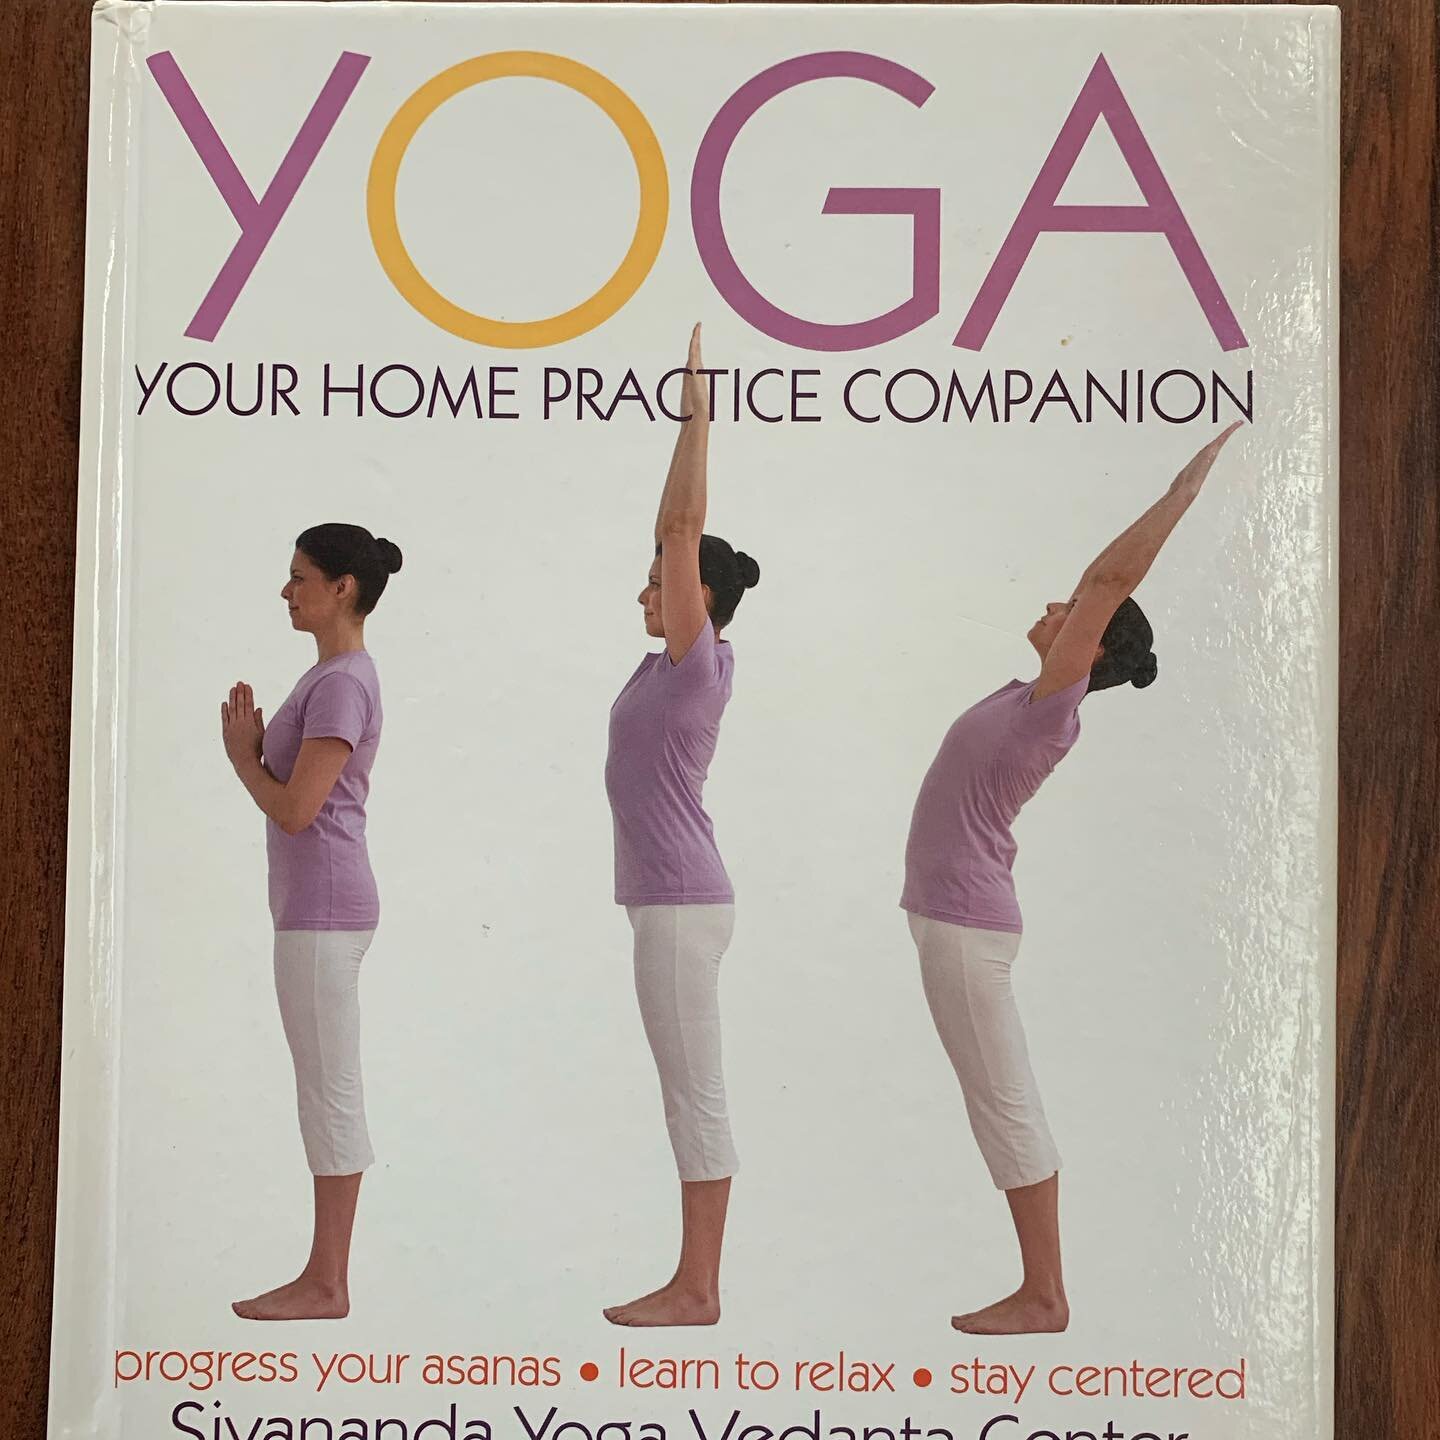 Looking for a great yoga postures reference book?  This one is super clear and easy to follow, with mentions of what not to do too. I recommend it.  #greatyogabook #pathwaystopeaceyoga #pathwaystopeaceyogaandhealing #recommendedyogabooks #iloveyoga #